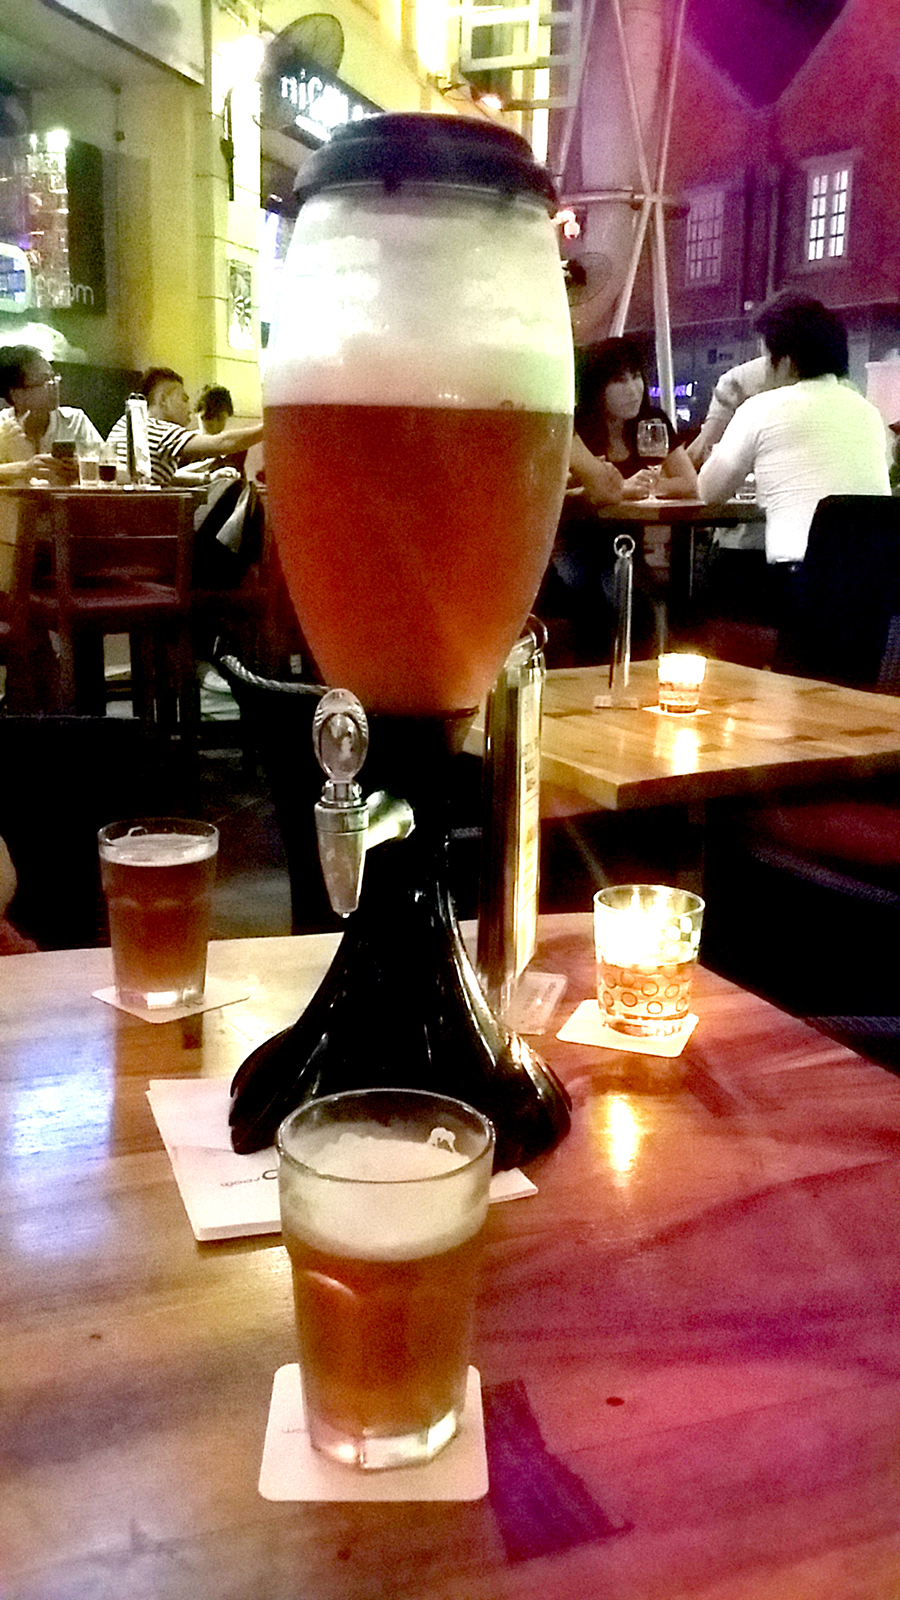 Tower of golden ale, Clarke Quay